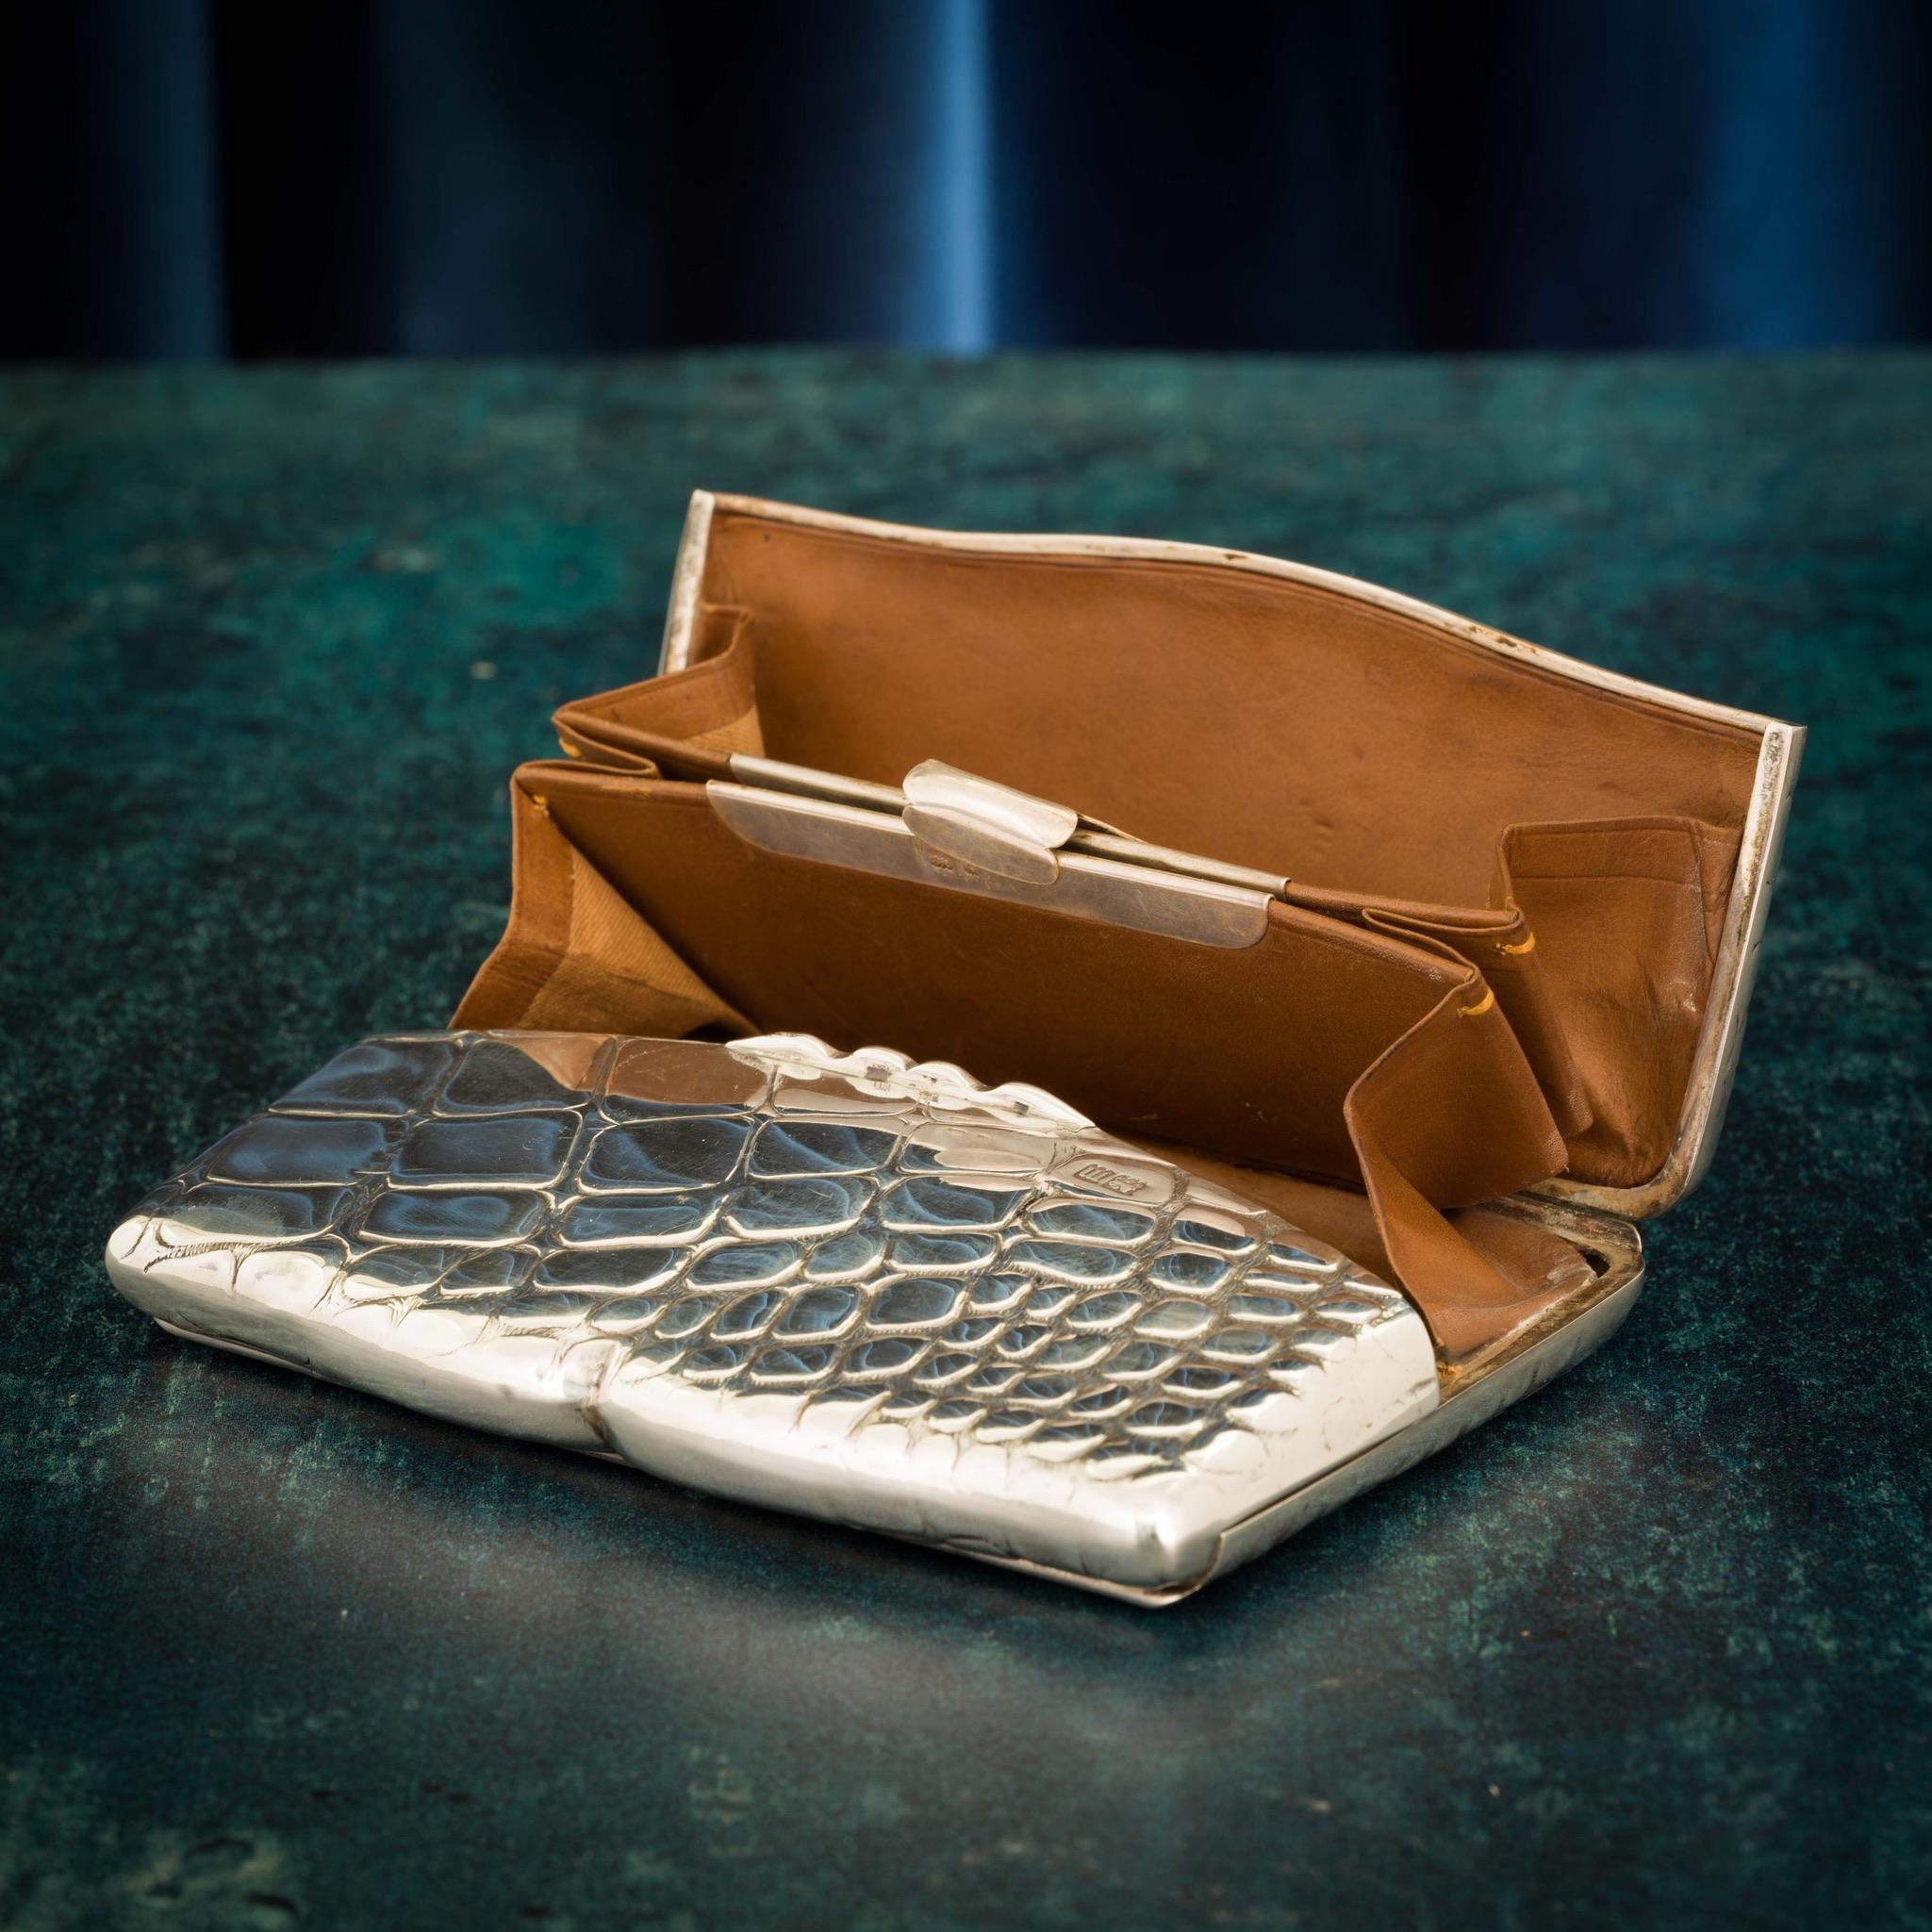 A spectacular silver coin purse and card case hallmarked London 1907, with a crocodile skin pattern realistically created in the silver. Maker's mark for Sampson Mordan & Co and stamped with Registered Design Number.

Dimensions: 10.5 cm/4⅛ inches x